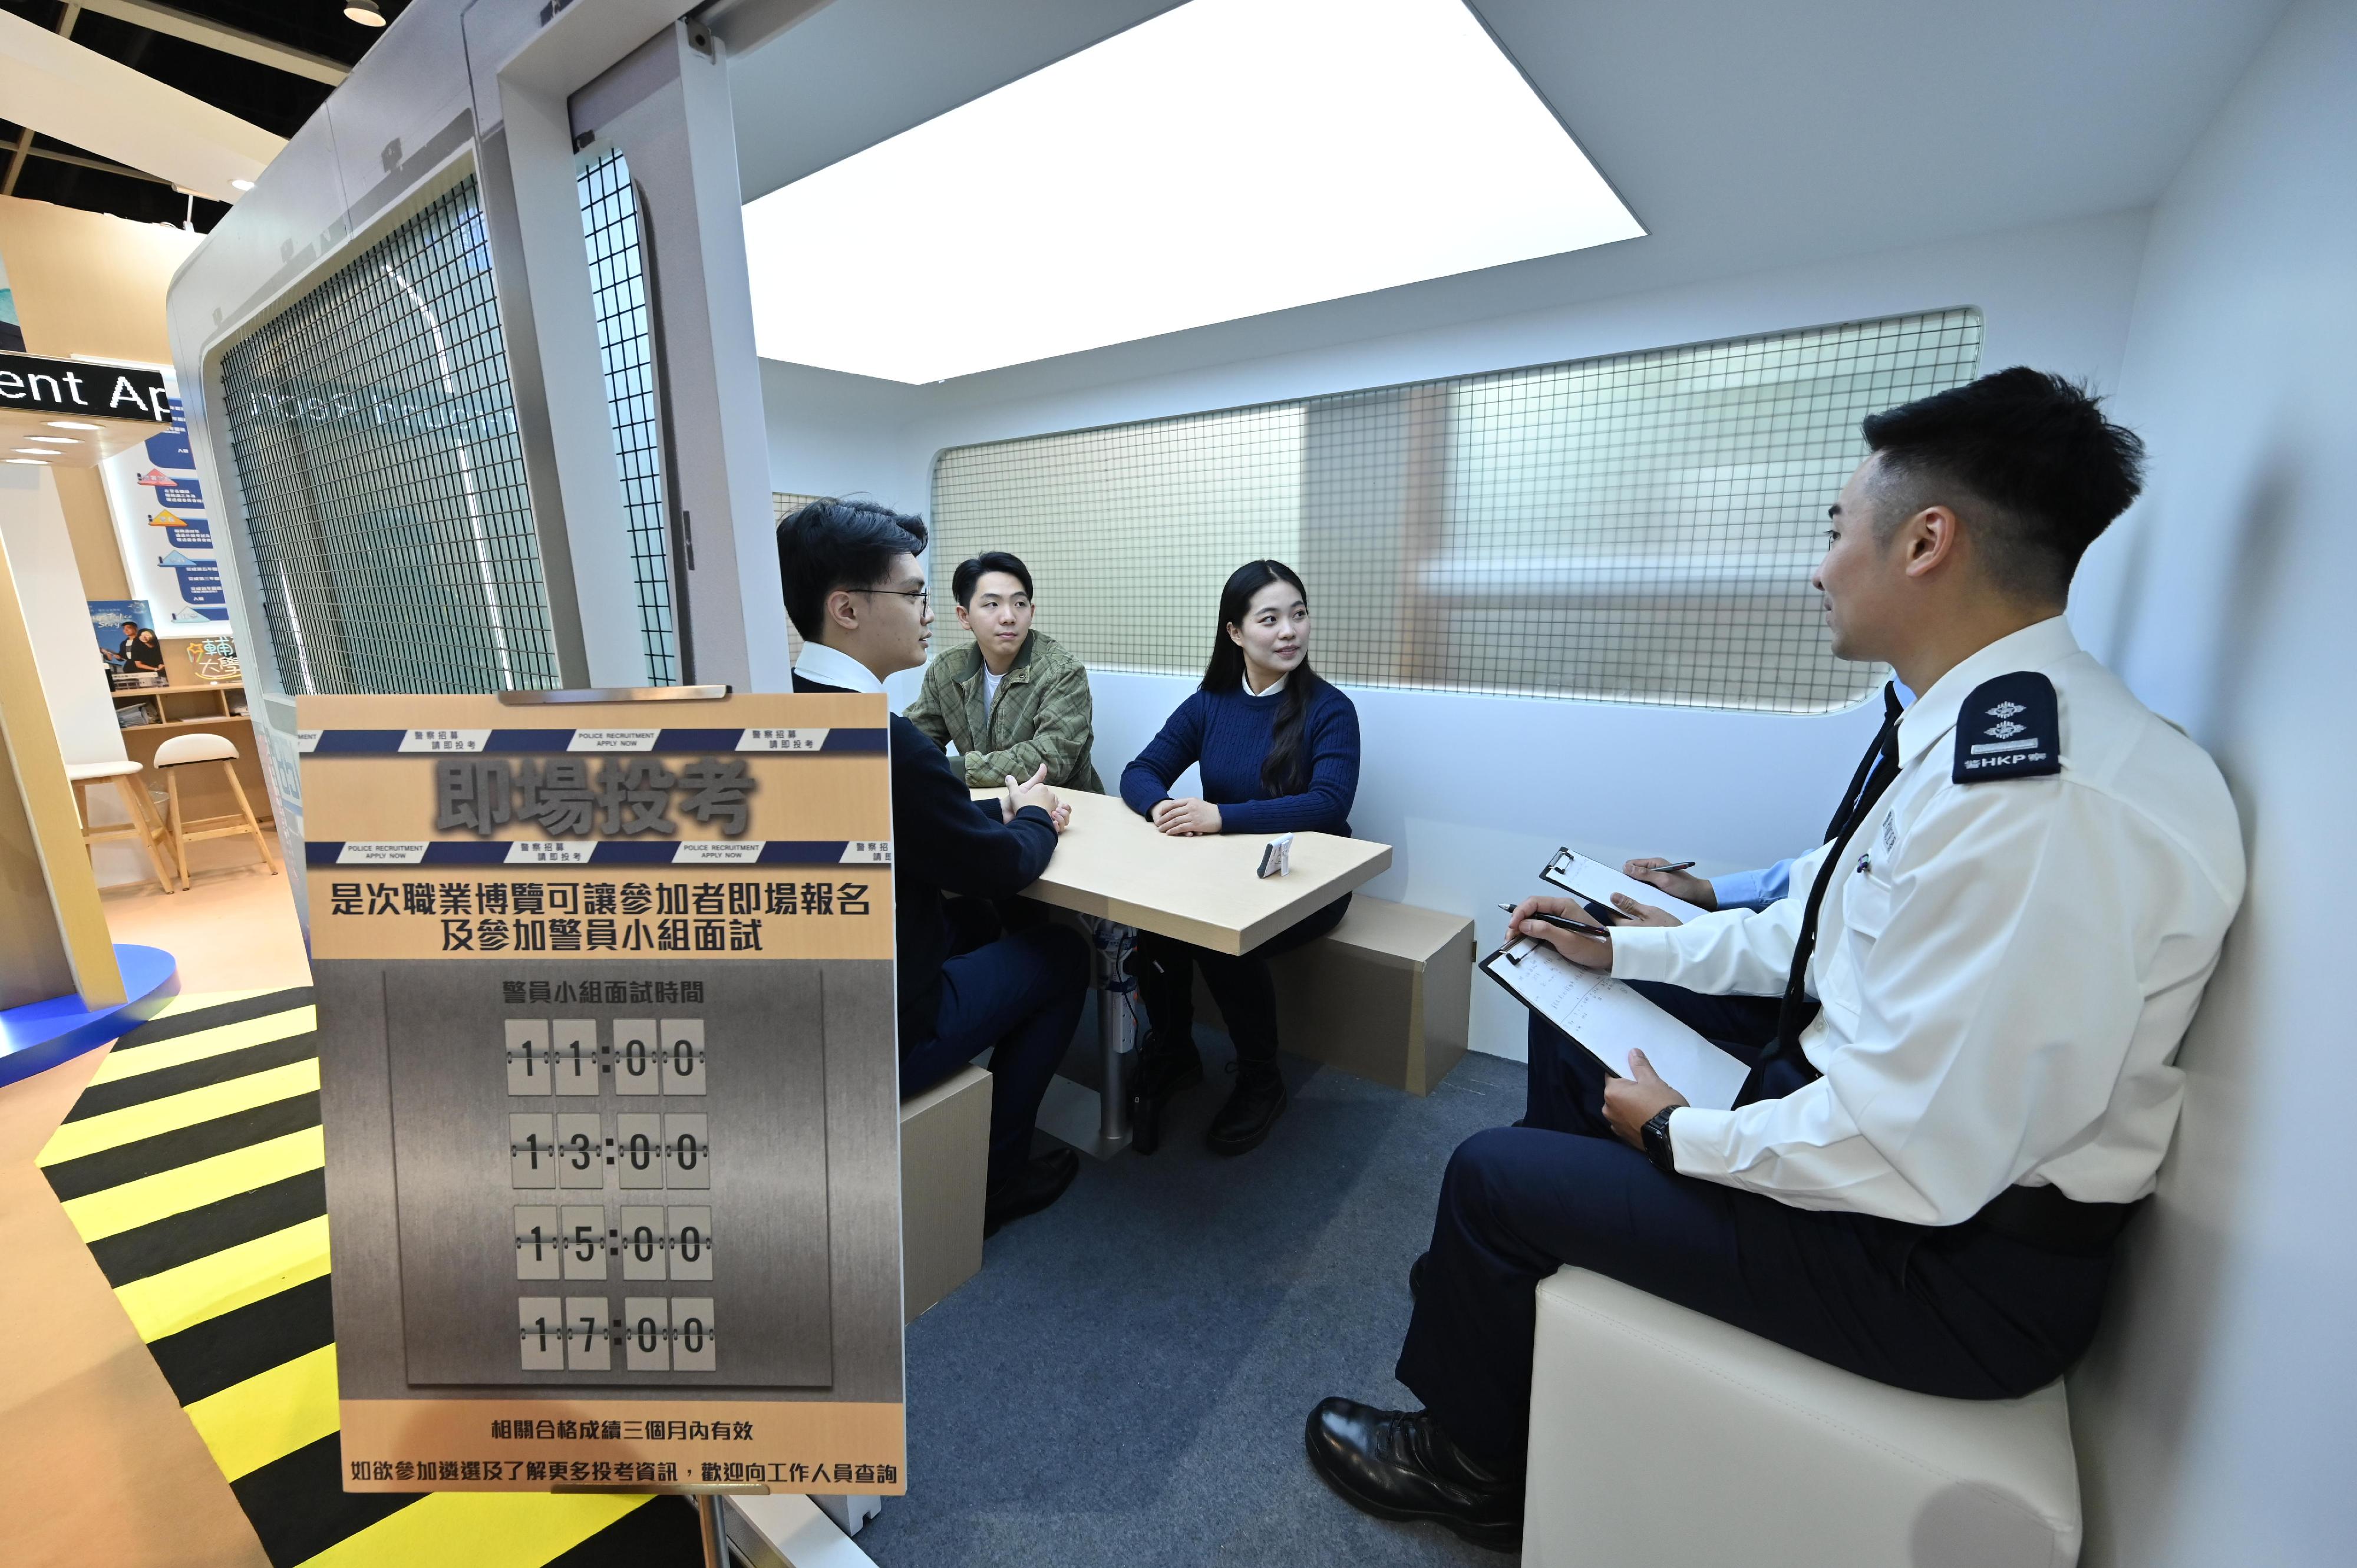 The Hong Kong Police Force introduces its work and provides recruitment information to visitors at the Education and Careers Expo 2024 for four consecutive days from today (January 25). Photo shows visitors attending an on-site group interview session for Police Constable on the "Recruitment Emergency Unit Car" set up at the booth.